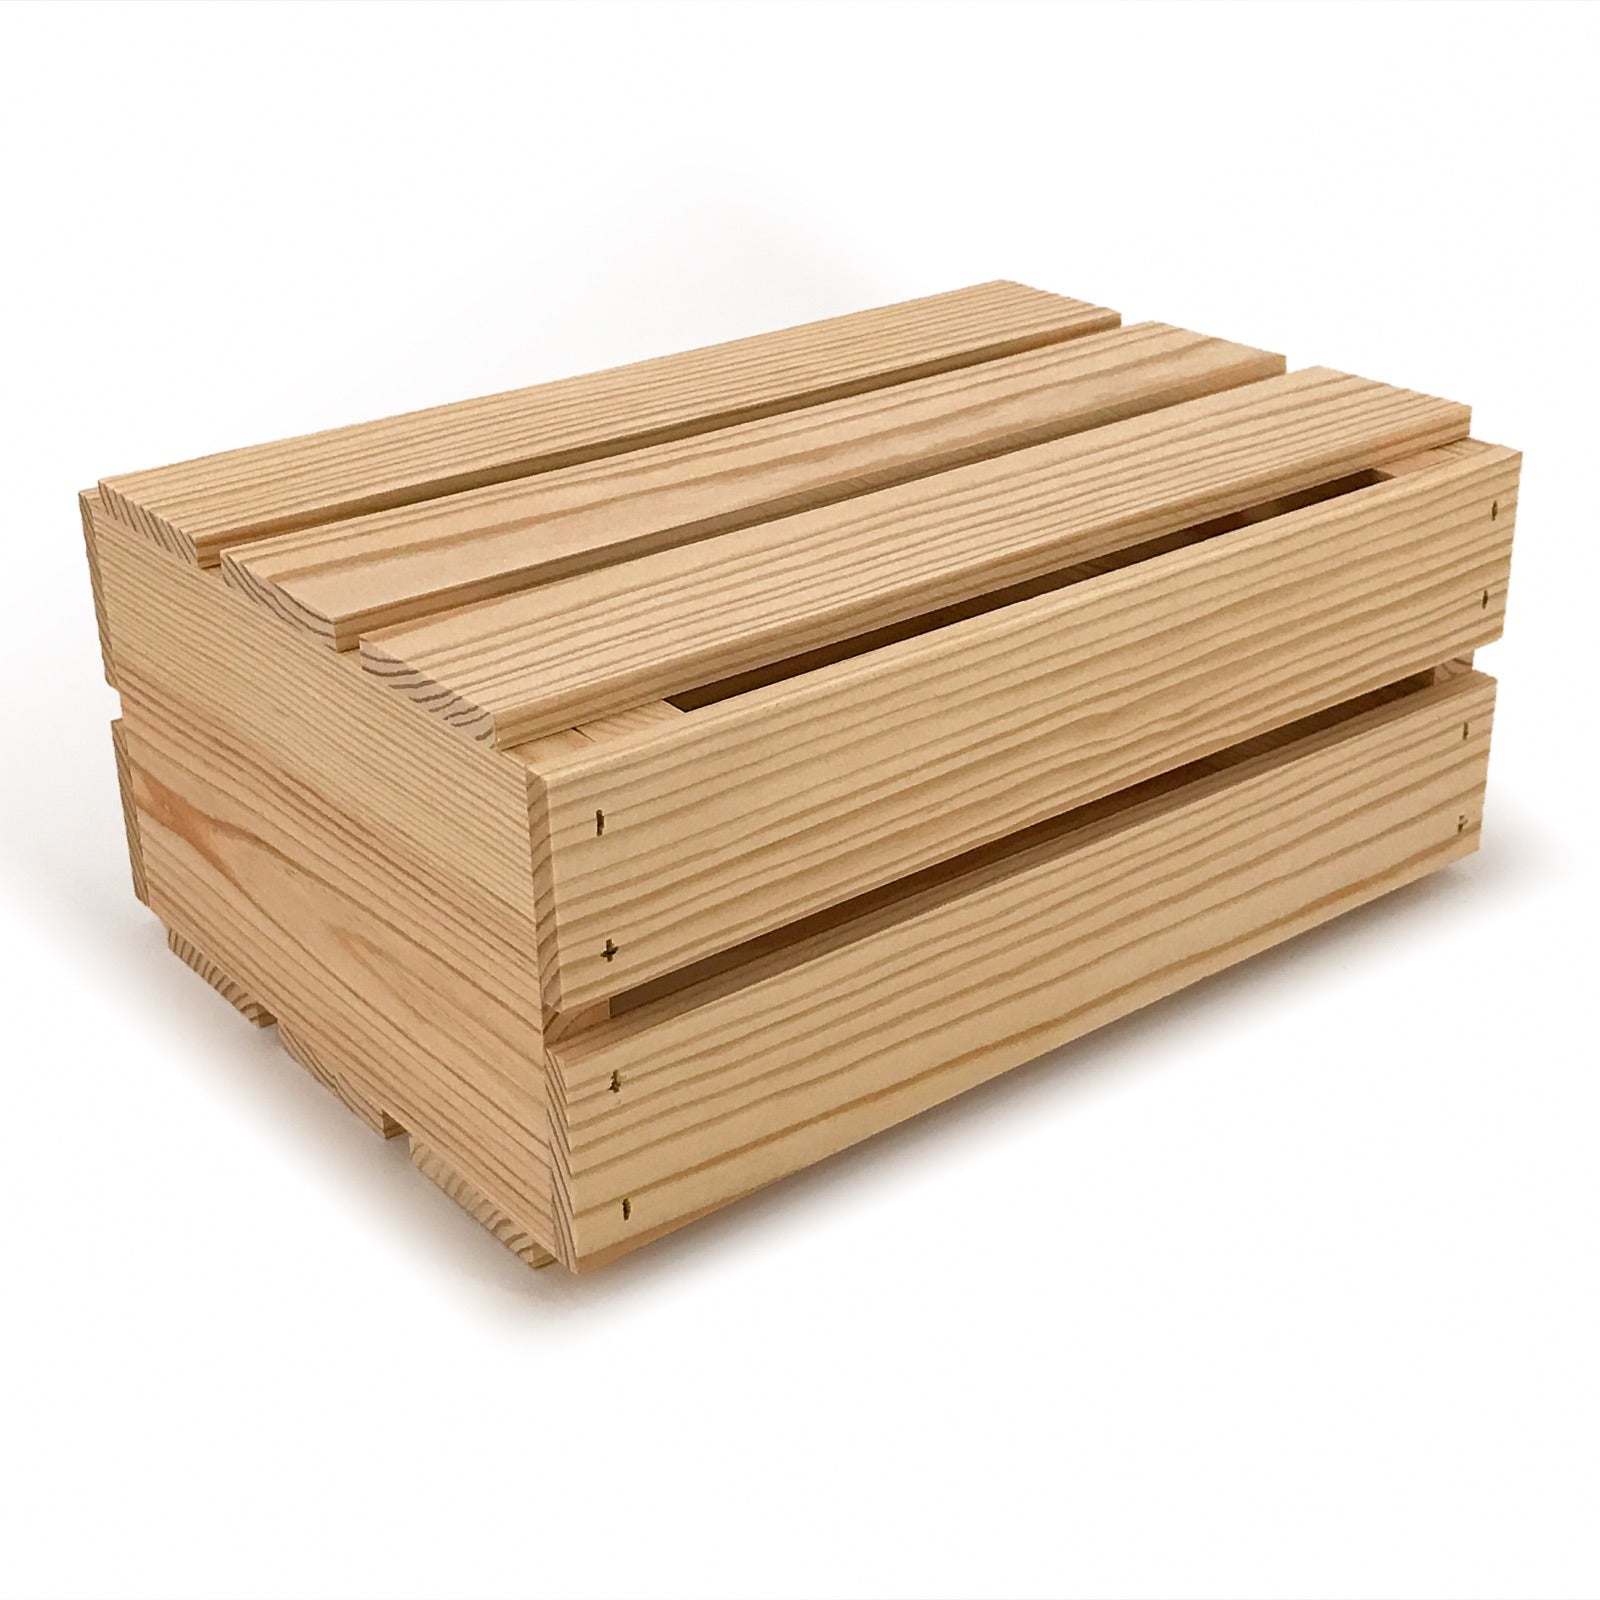 Small wooden crate with lid 12x9x5.25